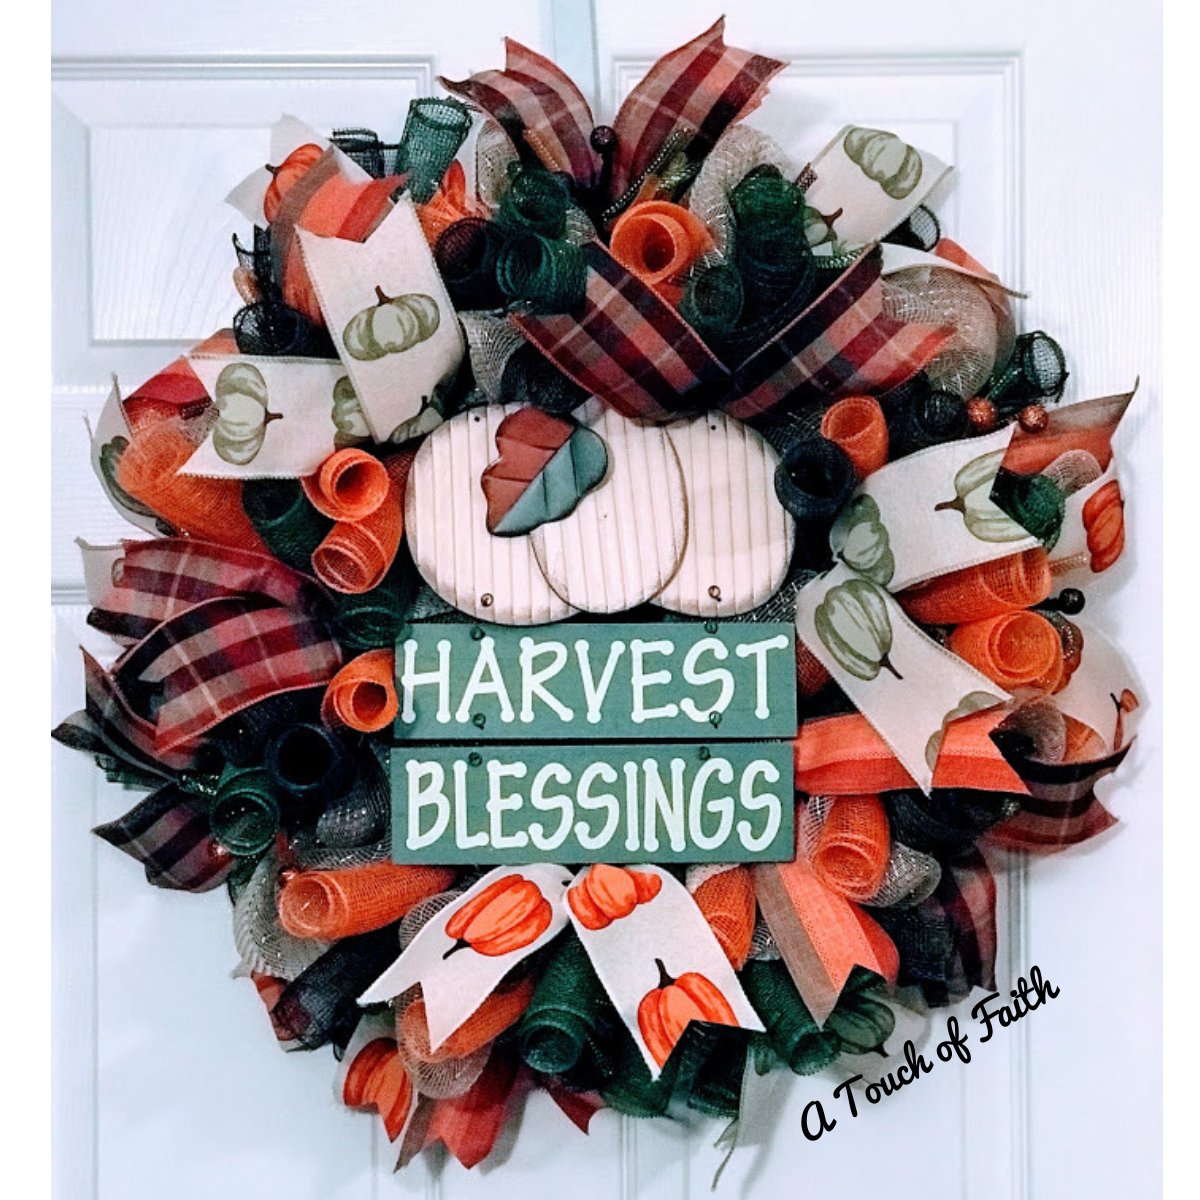 Let’s say hello to fall!  This is your season for harvest blessings. atofaith.ecwid.com/Fall-Harvest-B…
#ATouchOfFaith #atofaith #HarvestBlessings #FallWreath